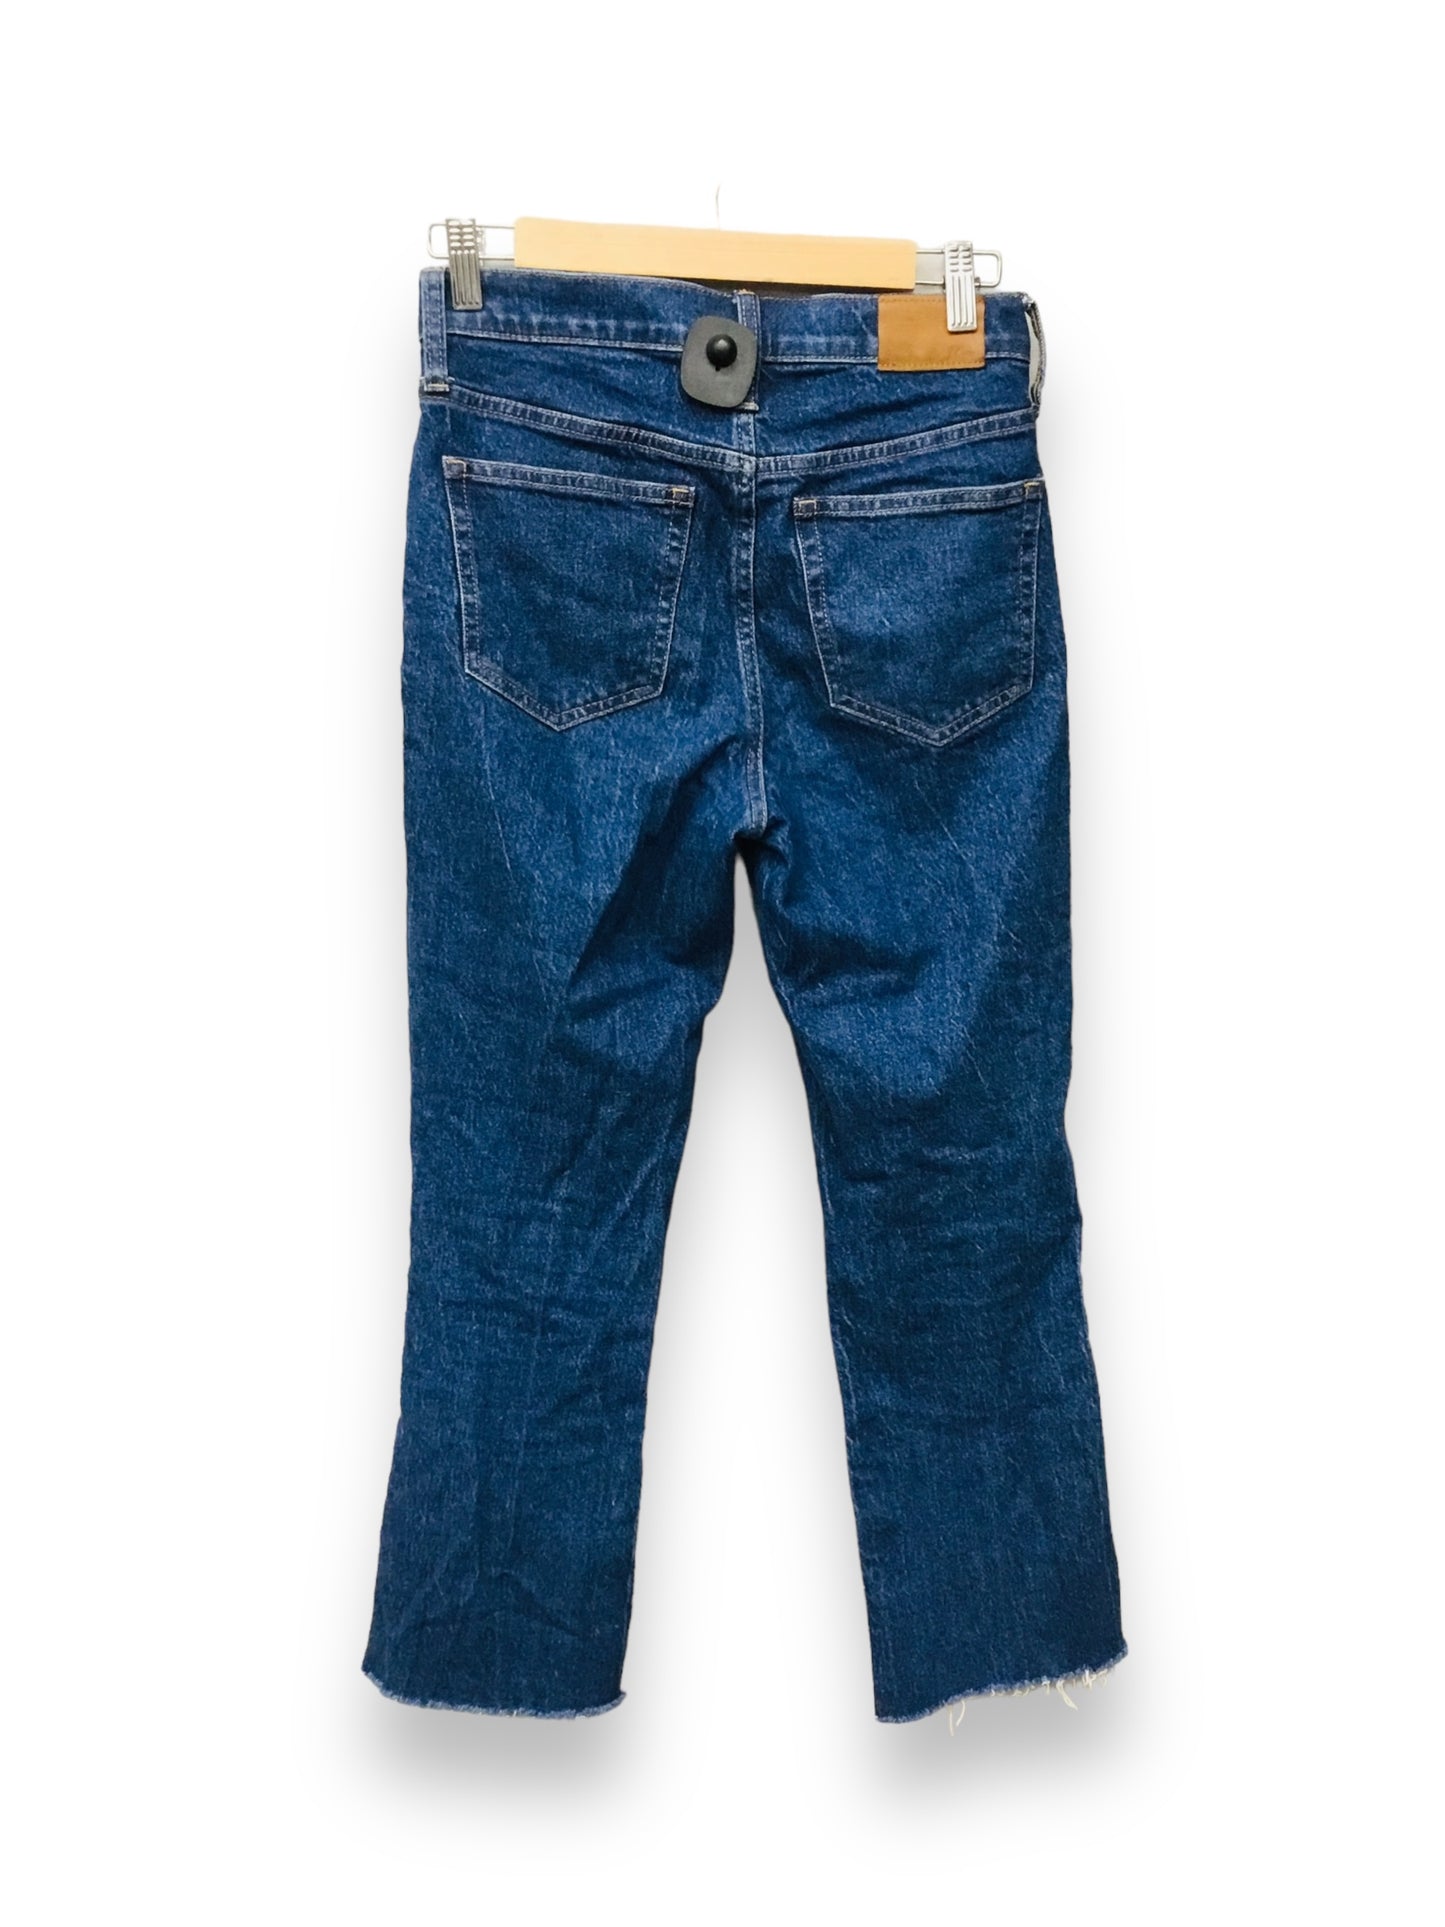 Jeans Cropped By J Crew  Size: 2